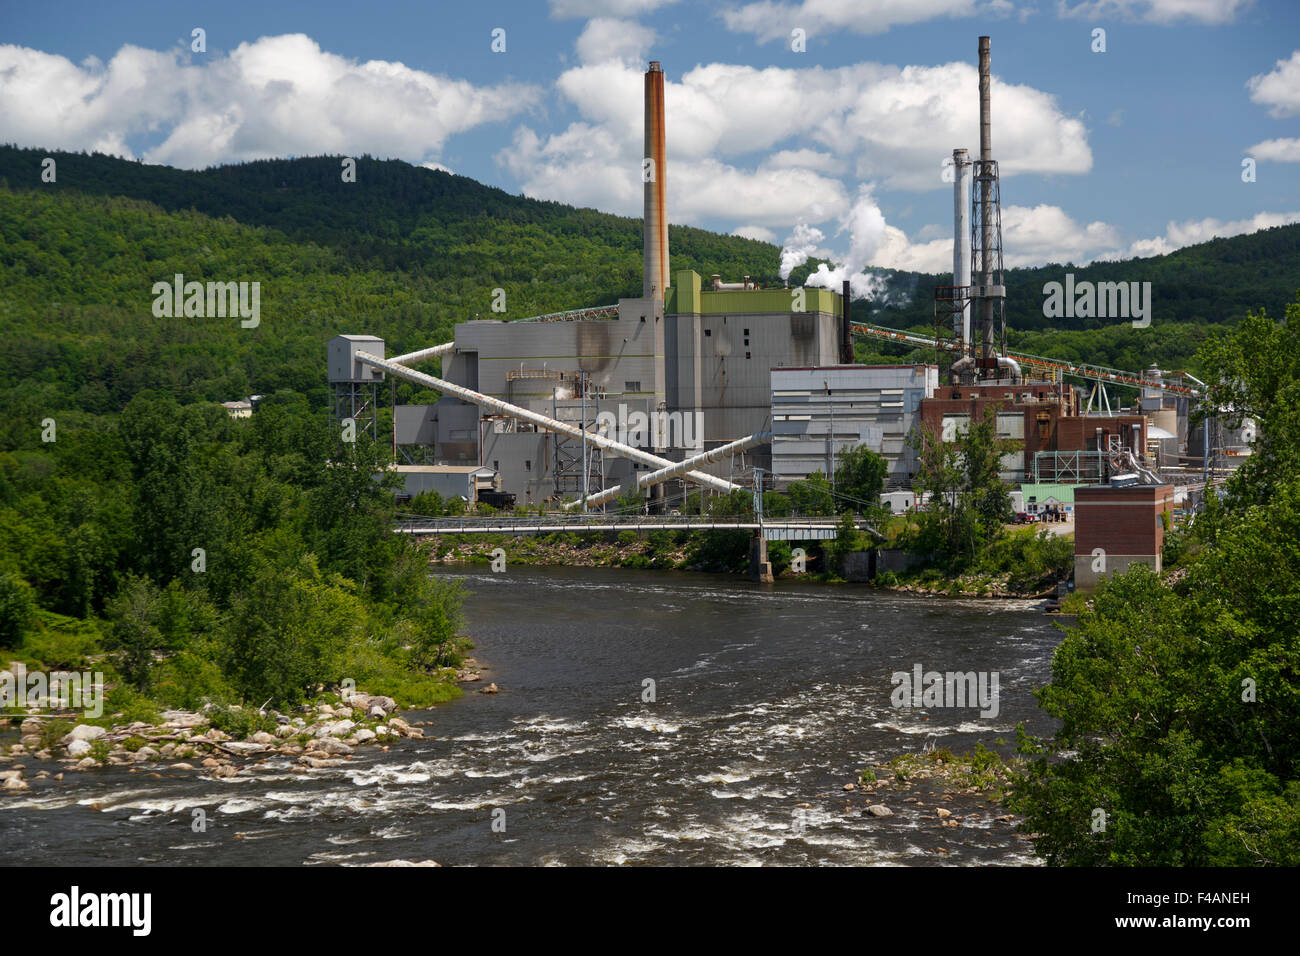 Rumford pulp mill and paper mill situated on the Androscoggin River seen from a bridge over the river. Maine USA June 2015 Stock Photo